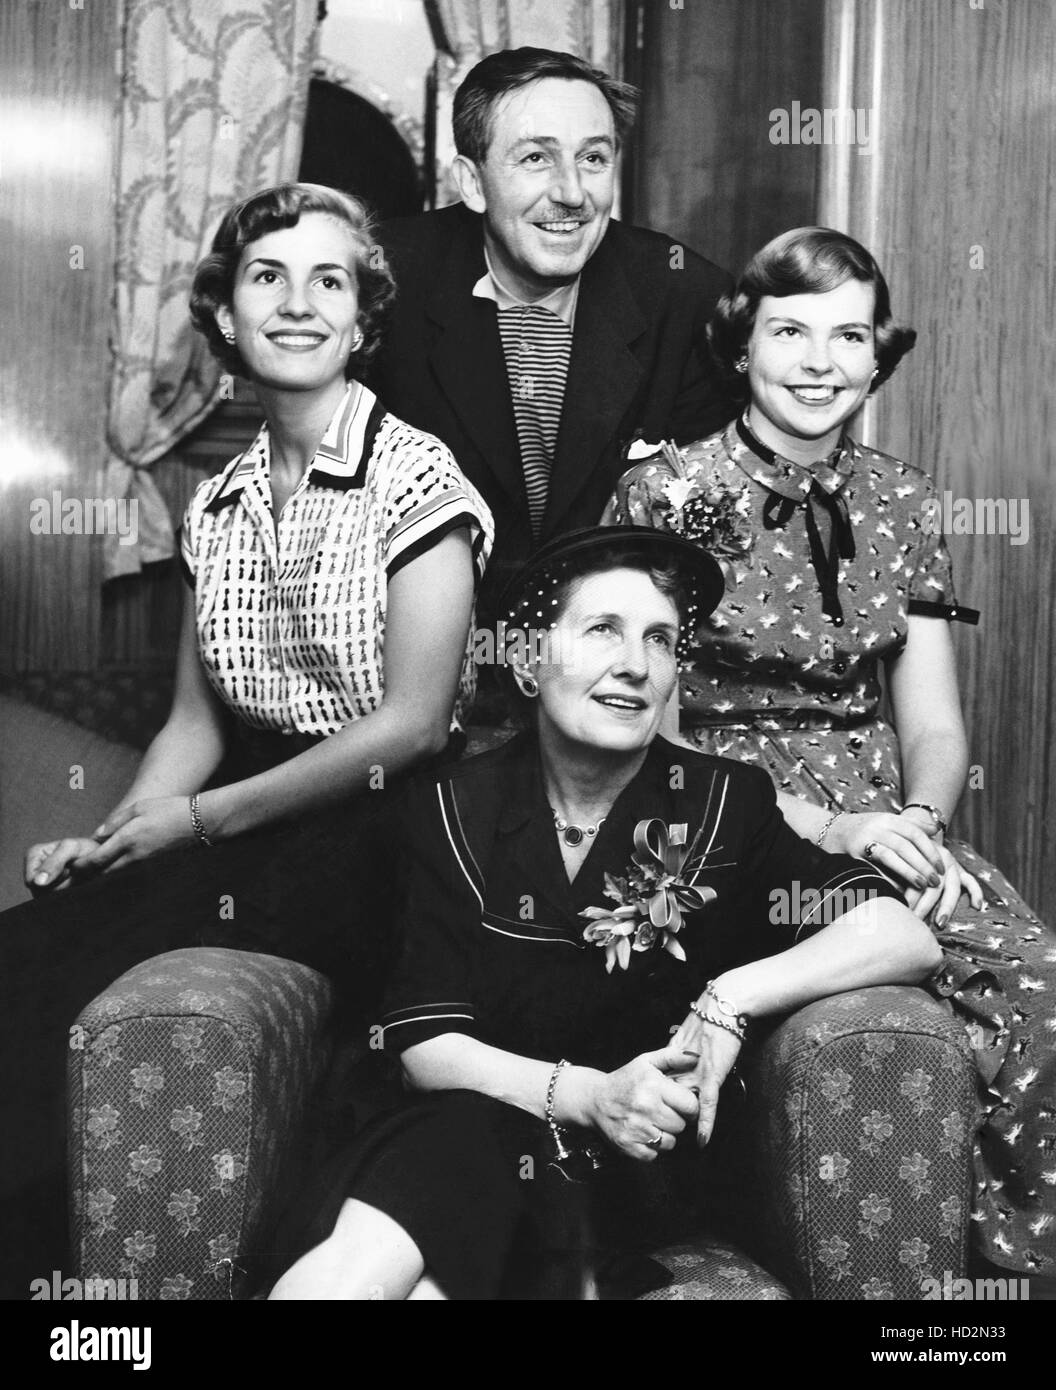 Walt Disney, back, with his wife, Lillian Disney, (seated) and daughters Diane Disney, (left) and Sharon Disney, 1951 Stock Photo